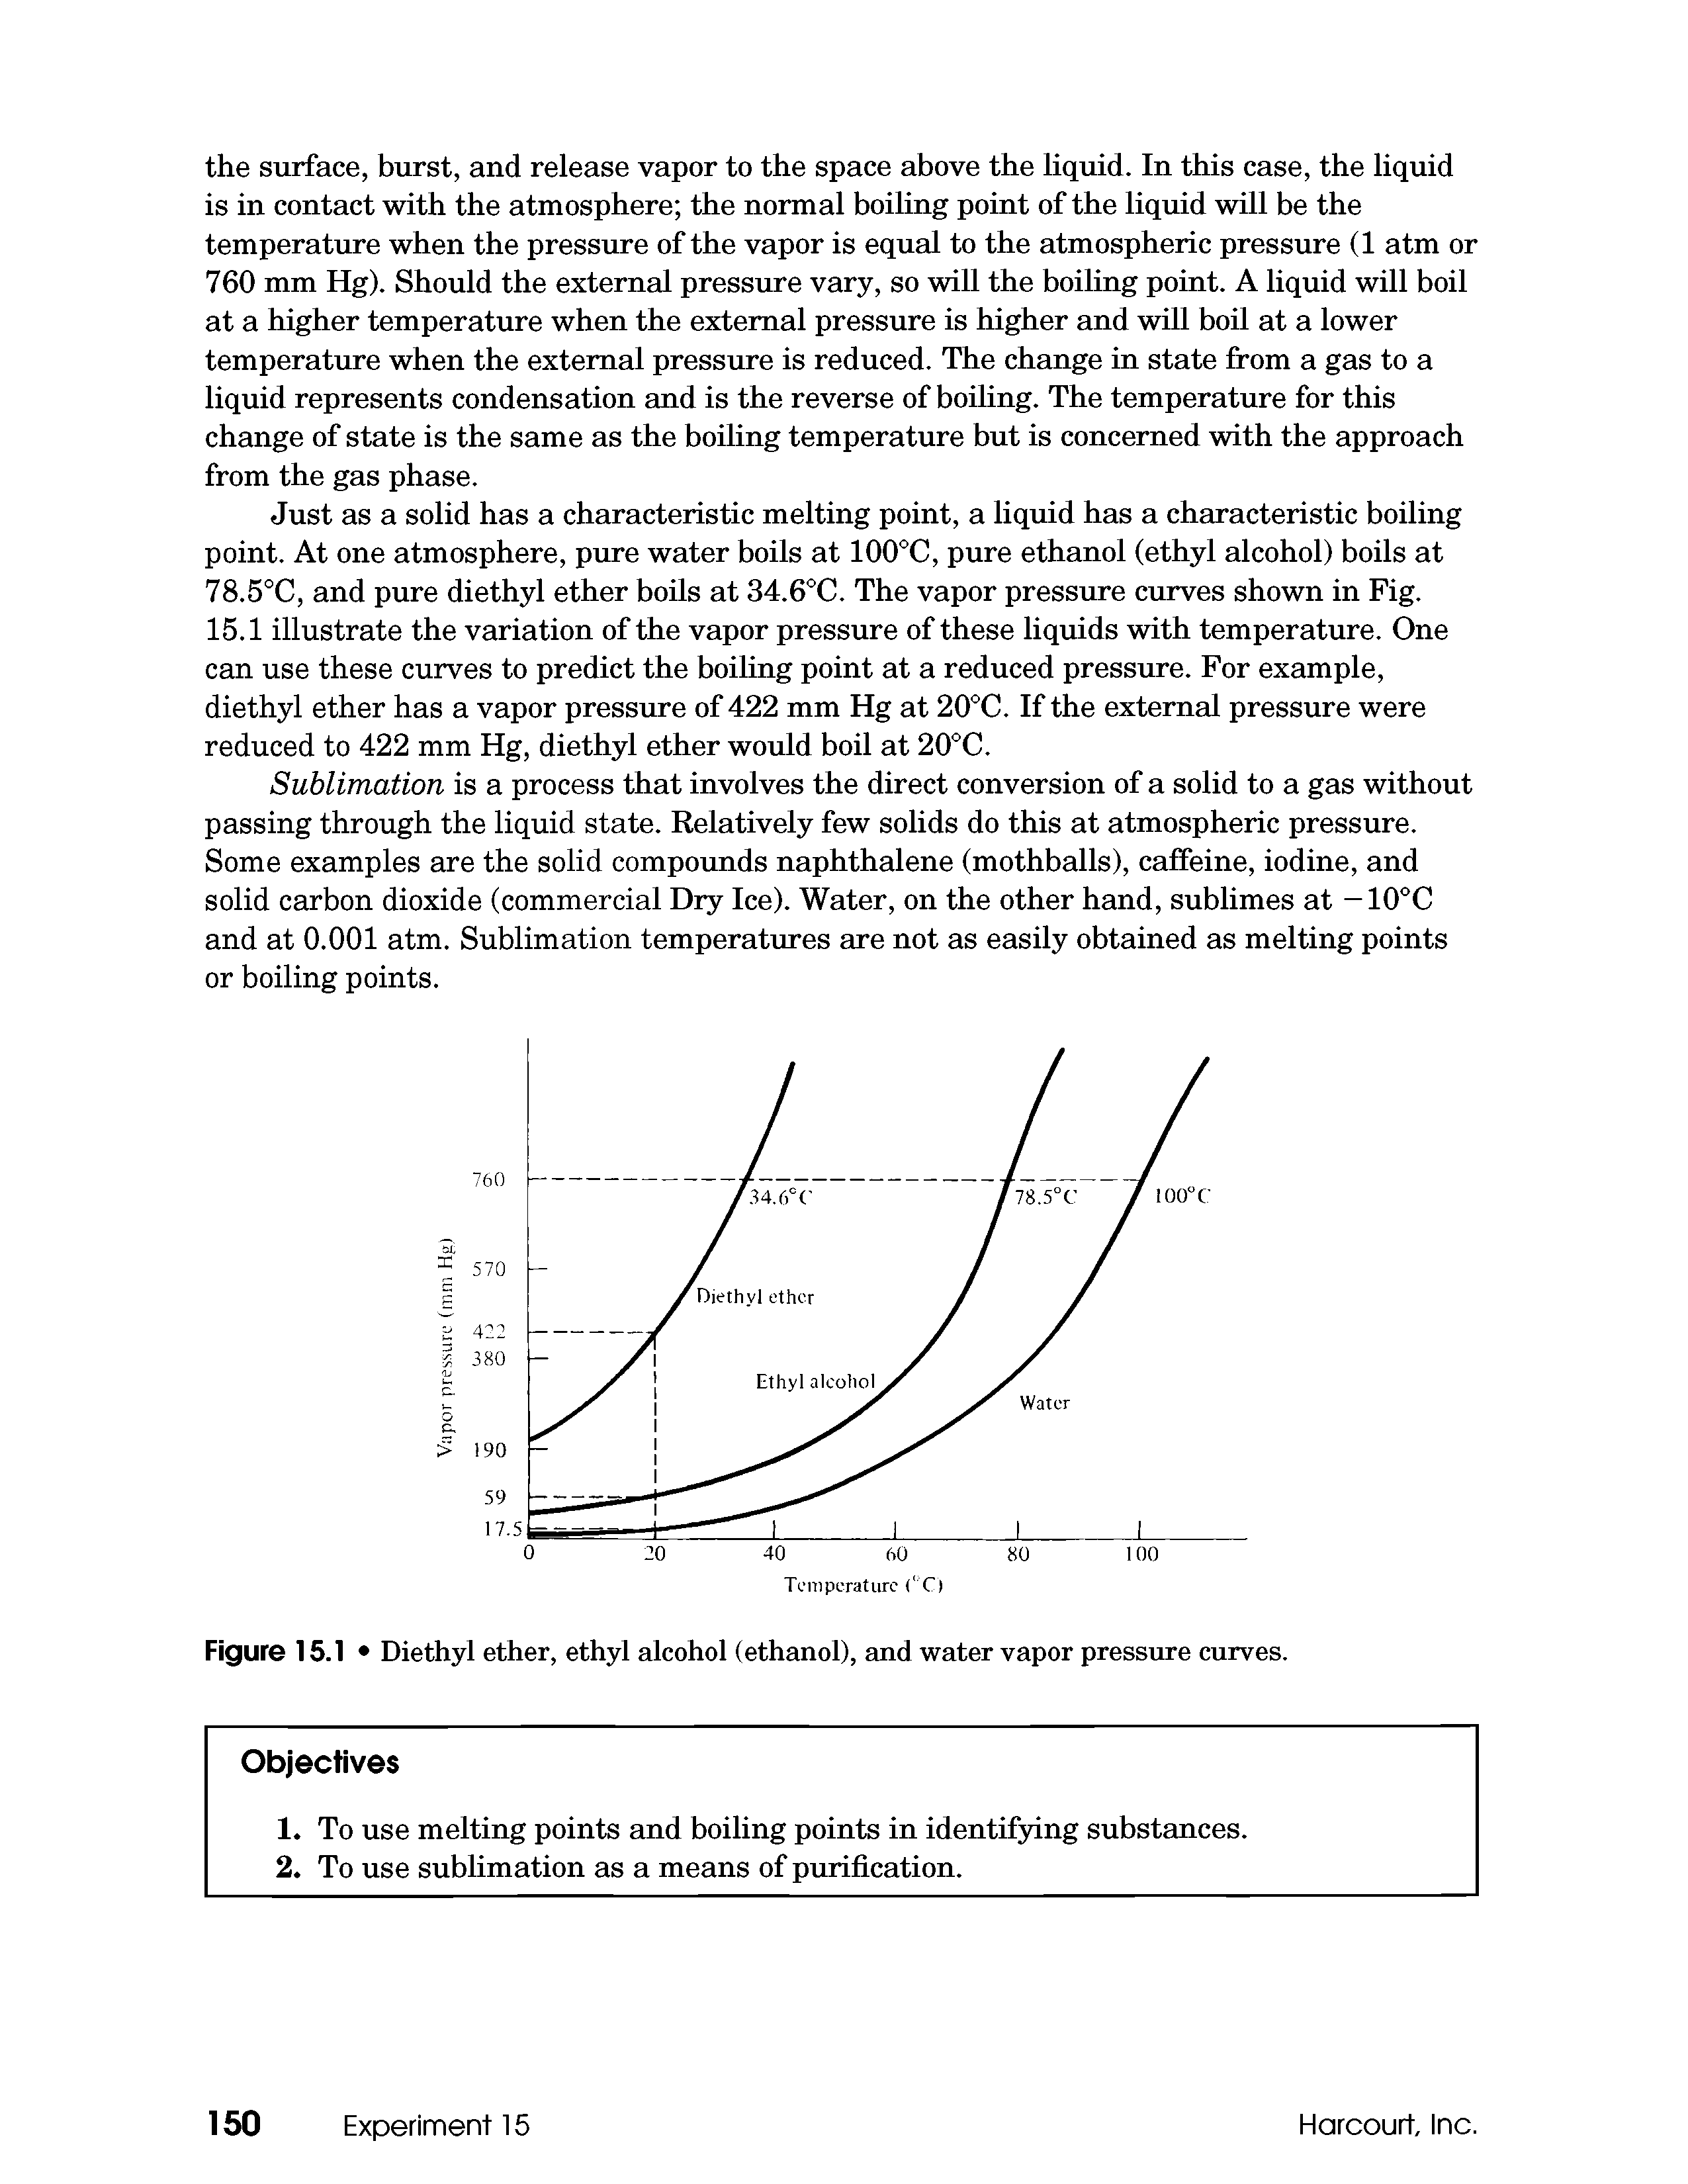 Figure 15.1 Diethyl ether, ethyl alcohol (ethanol), and water vapor pressure curves.